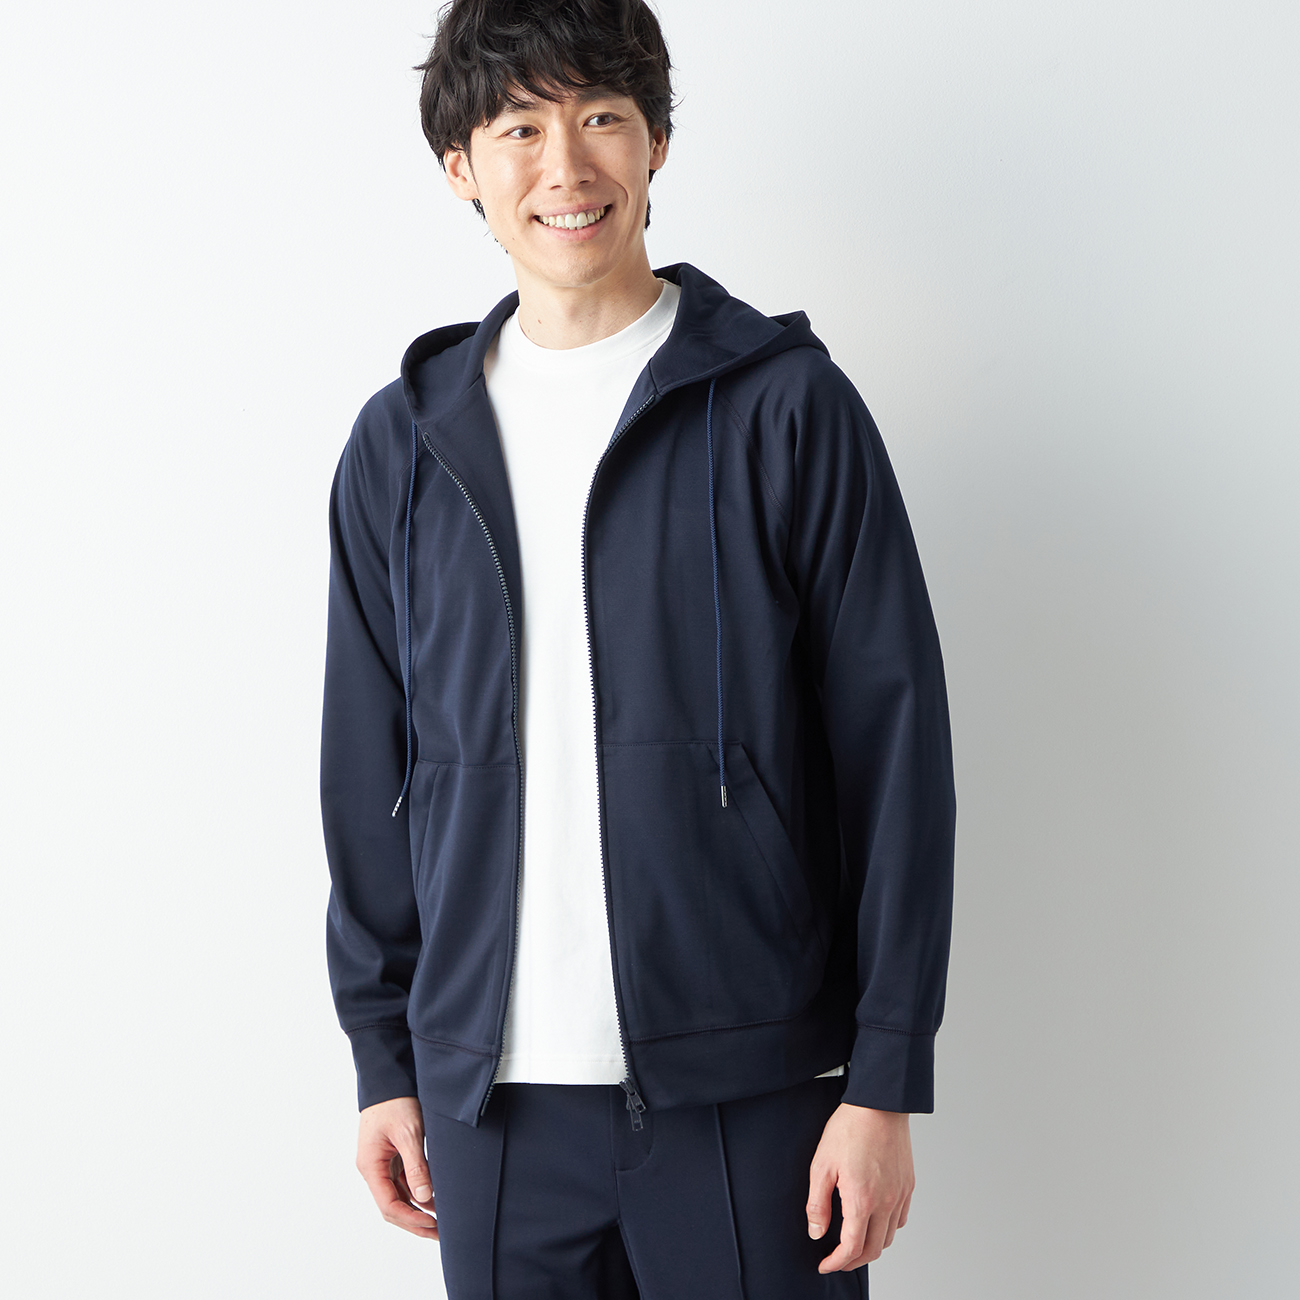 【SPORTY CASUAL】ストレッチジャージパーカー セットアップ着用可